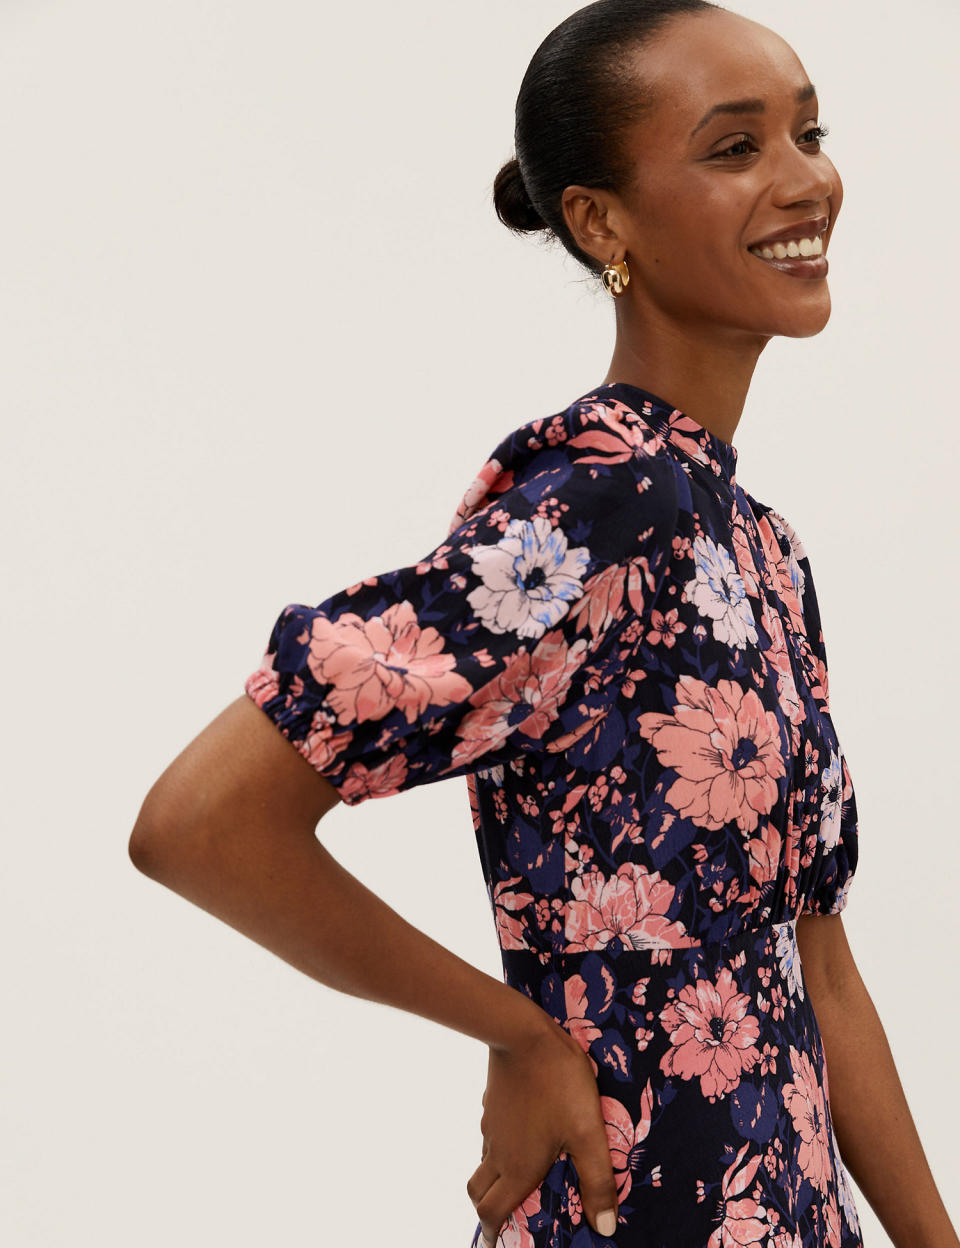 The tea-dress is tapered under the bust for a flattering silhouette. (M&S)